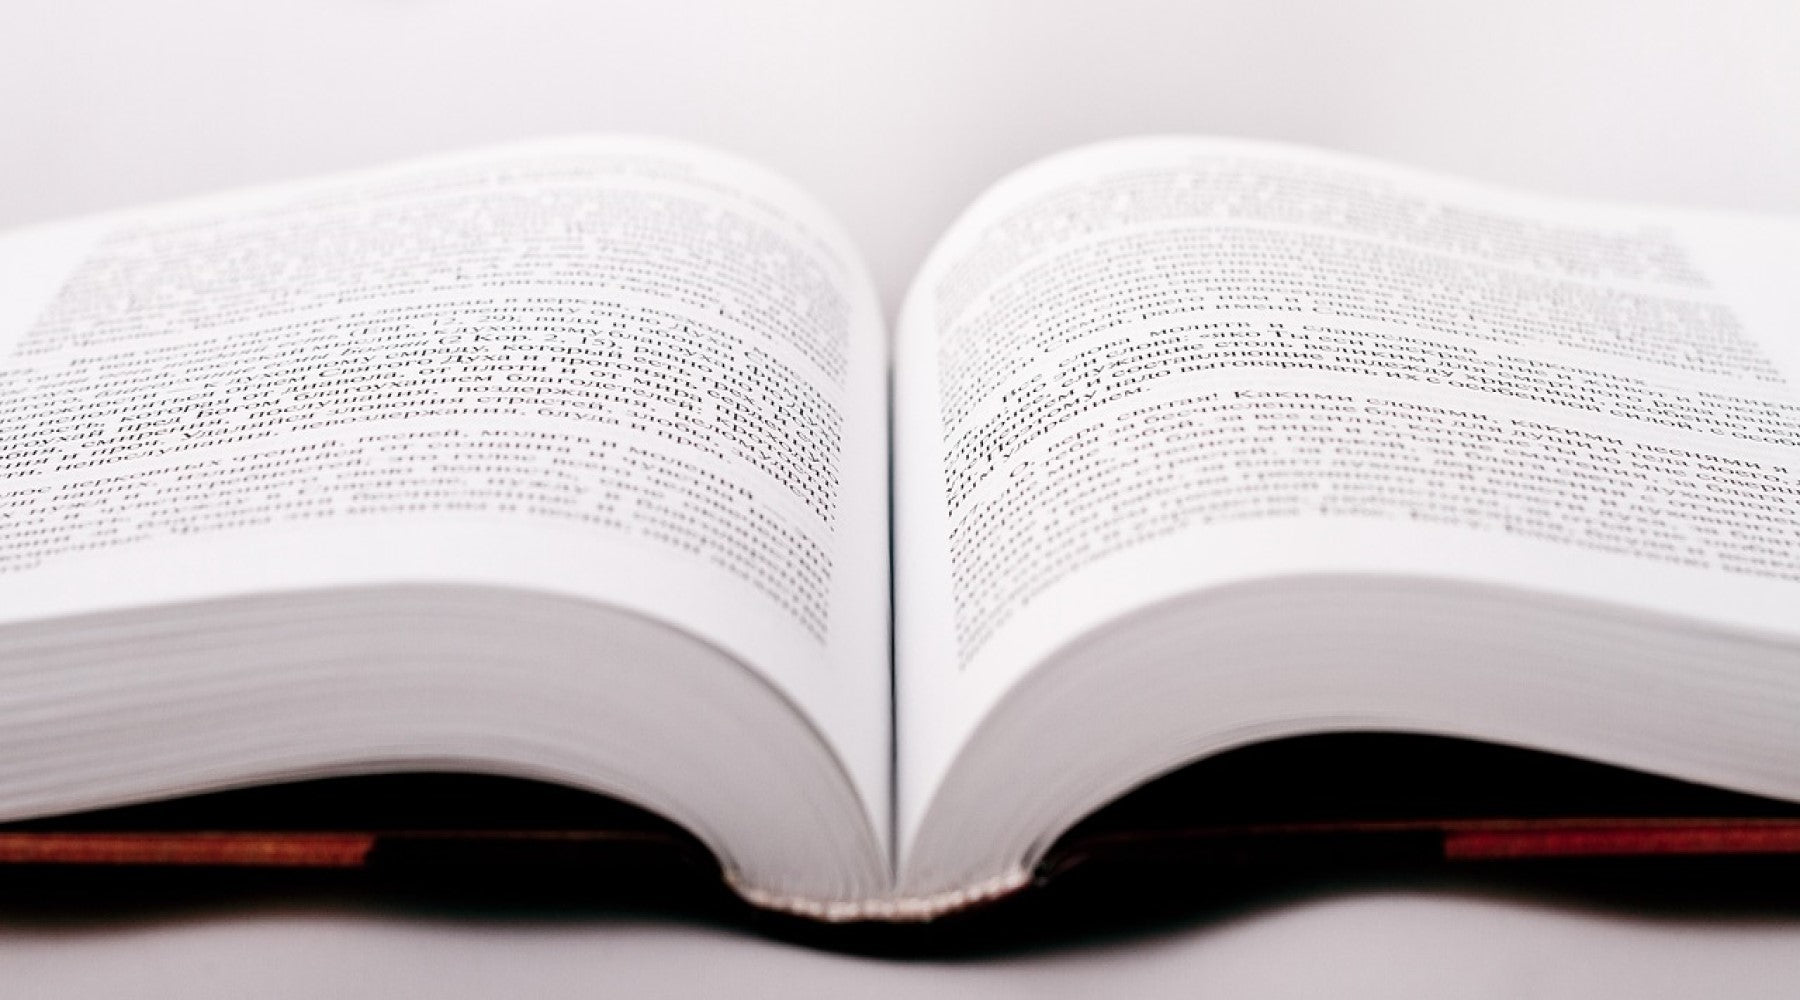 Picture or photograph of a dictionary that is open on a desk. Has a white background.